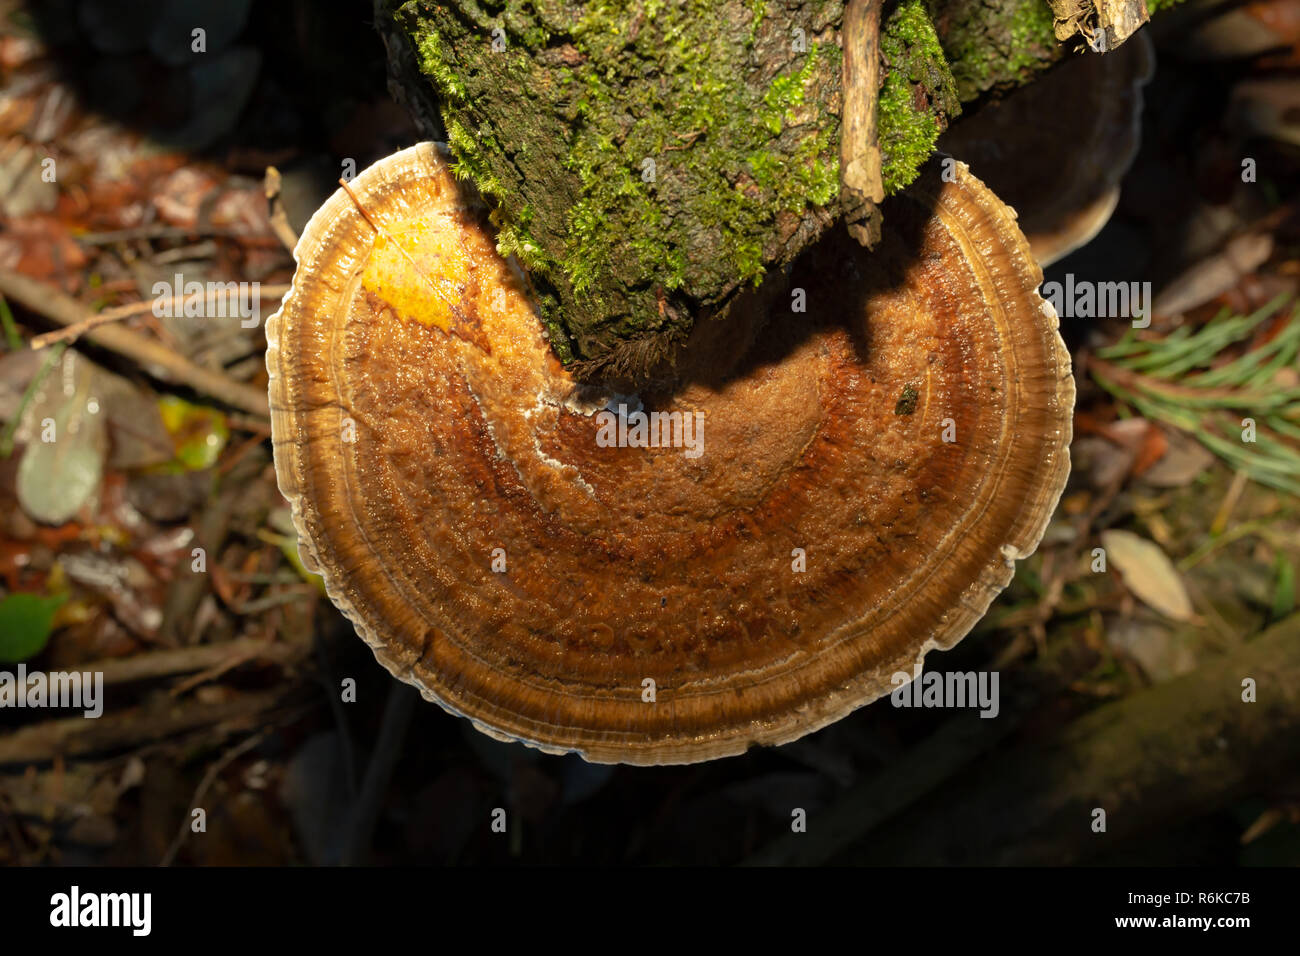 Close-up colour photograph of a circular blushing bracket polypore on fallen wood illuminated with on-camera flash with orange filter. Stock Photo